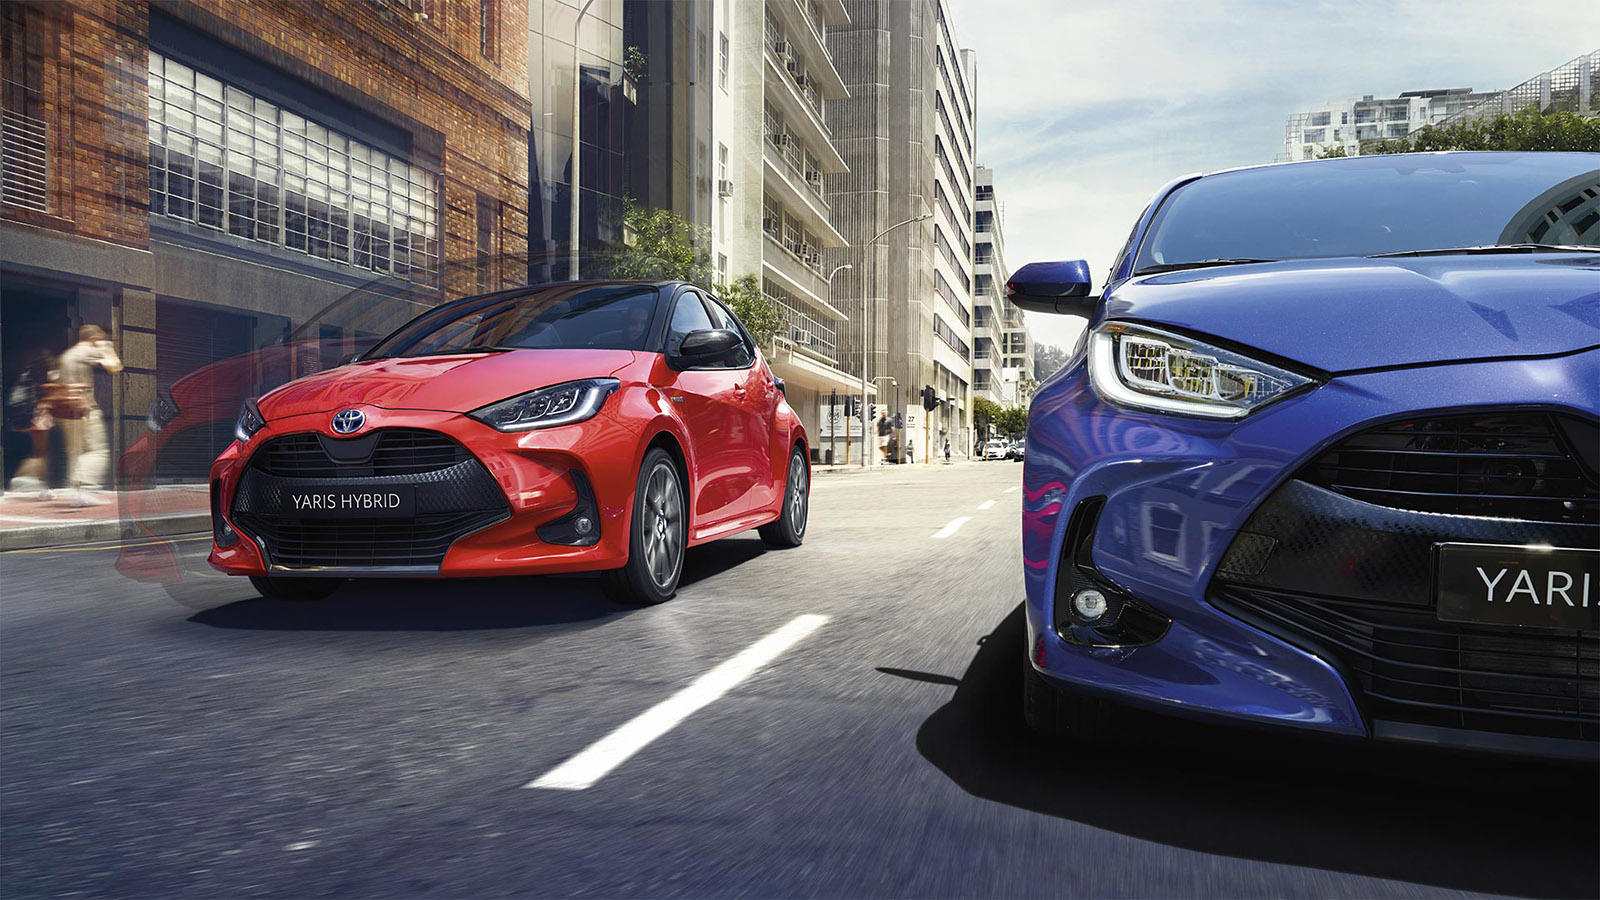 THE BRAND NEW YARIS HYBRID ARRIVES TO TOYOTA DEALERSHIPS